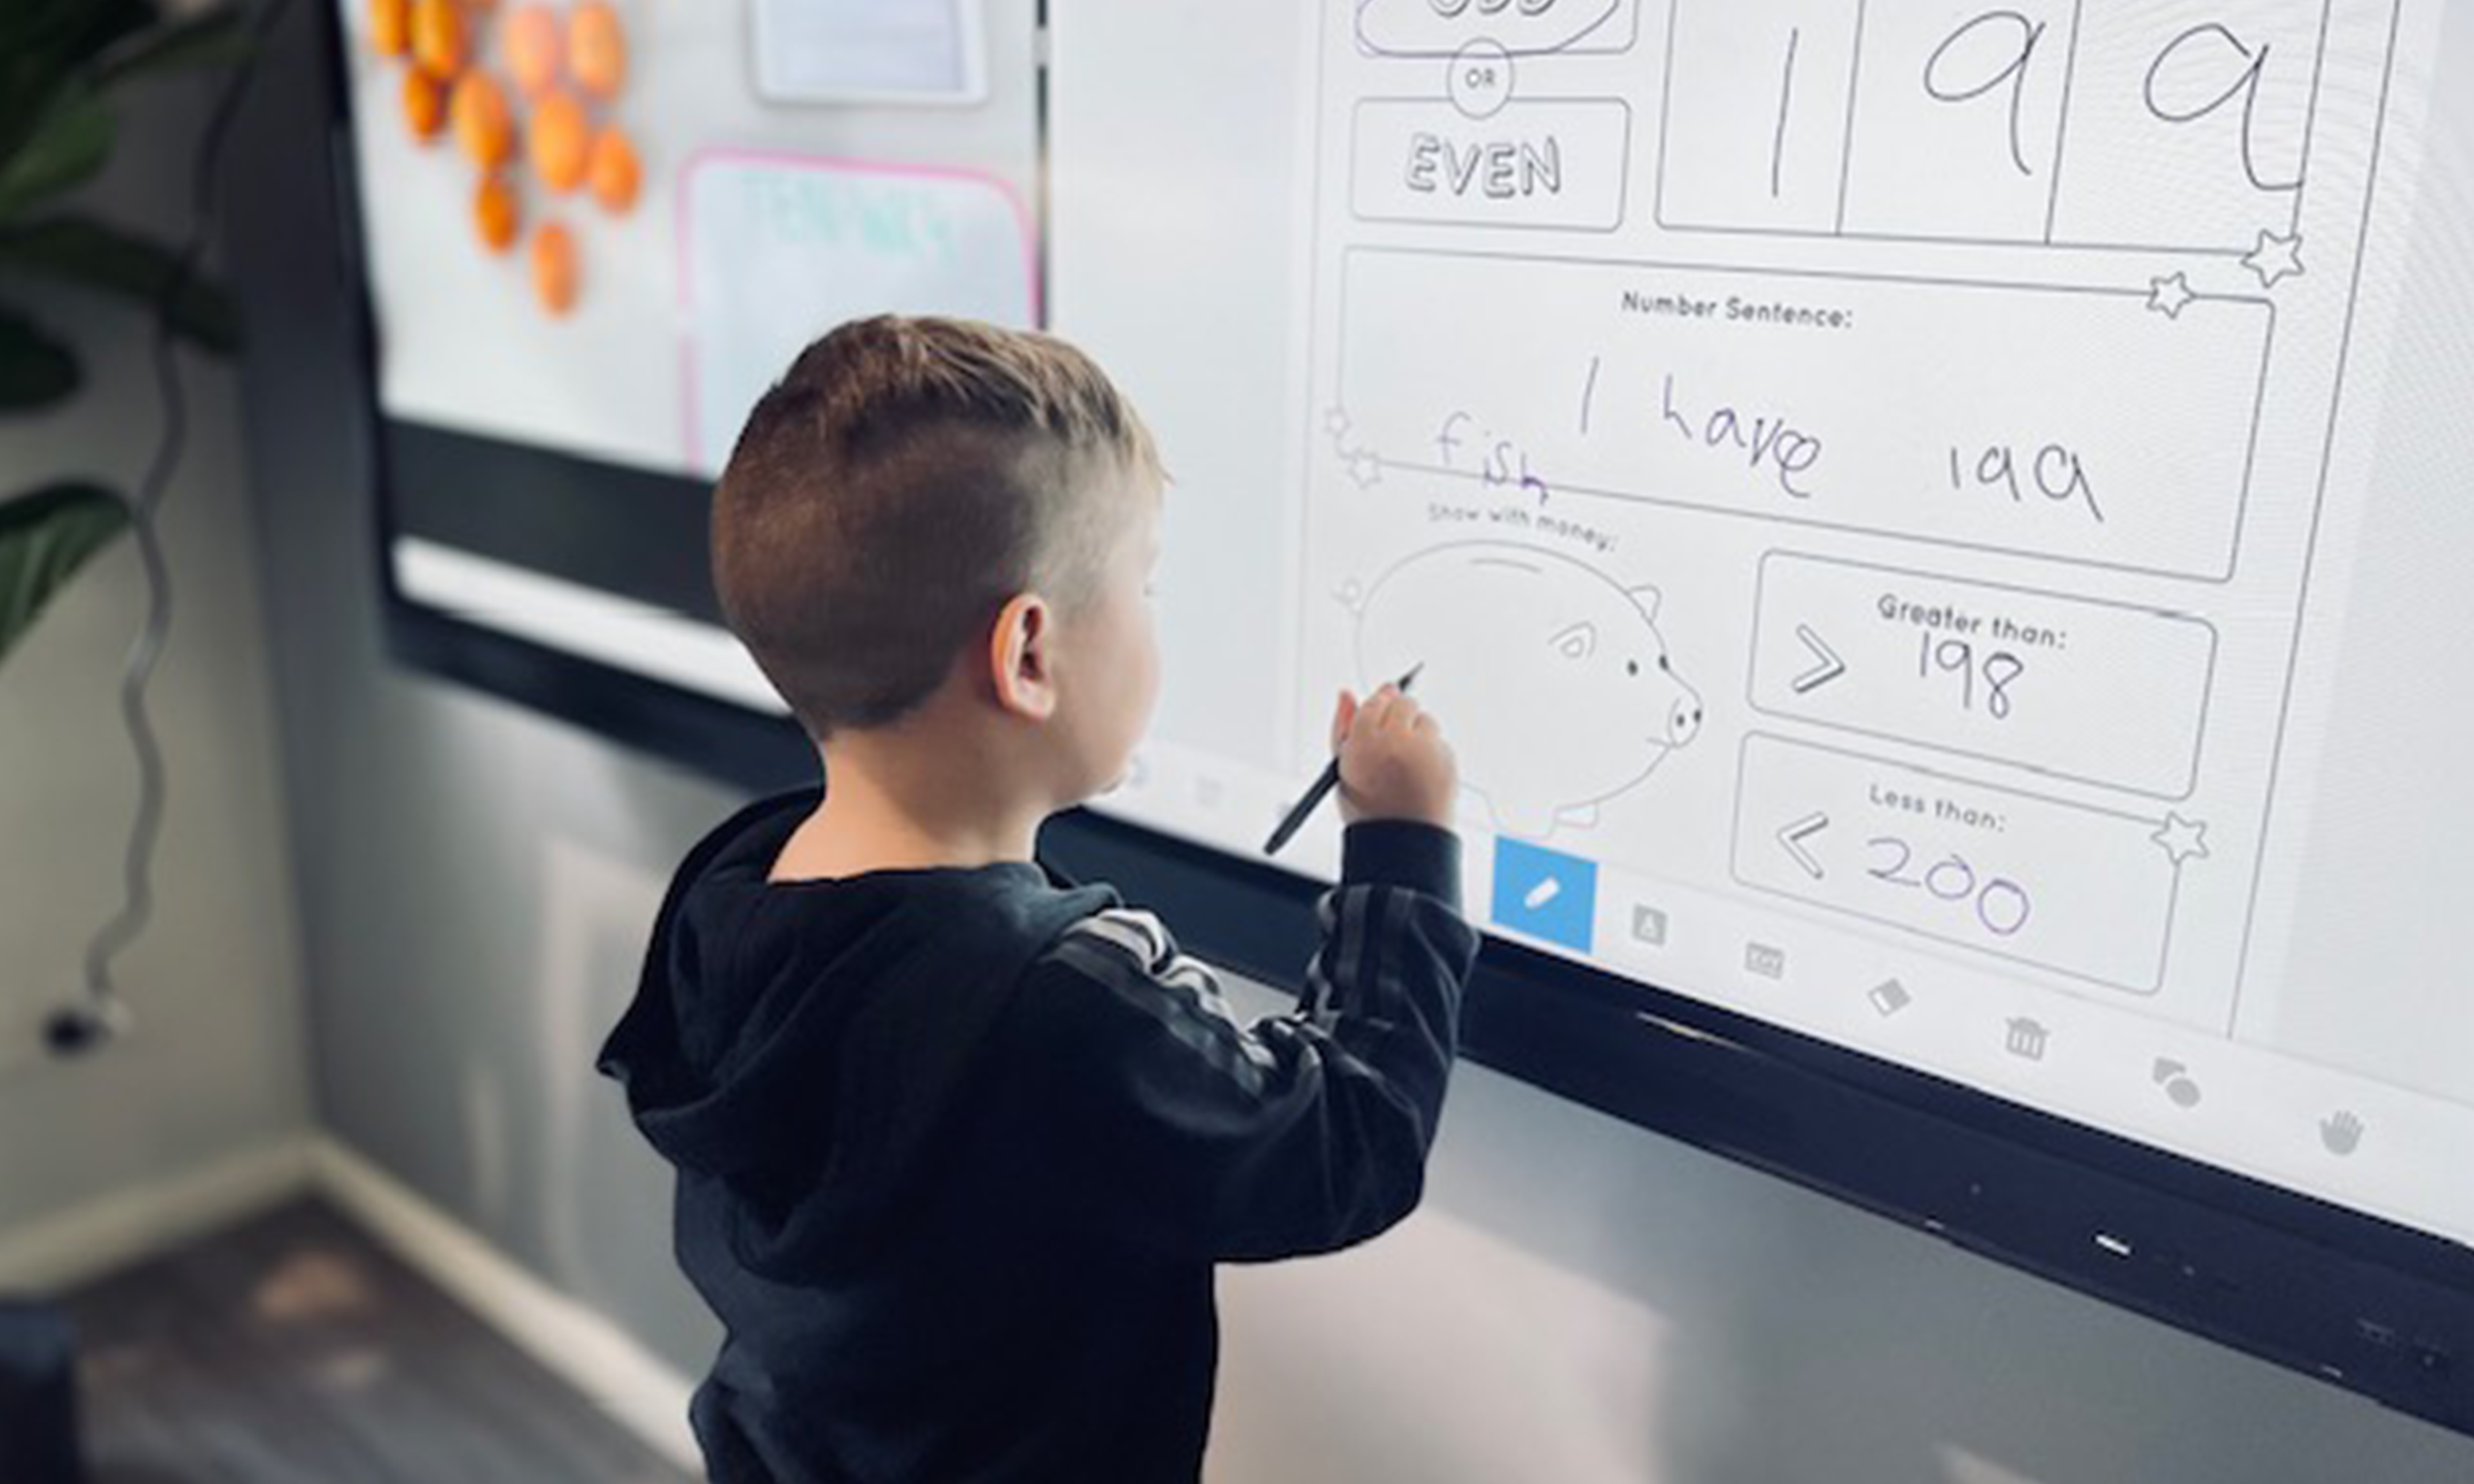 Interactive Whiteboard Panels by Epontis branding Design | Epontis deliver, manage and support business-critical technology across cloud, security and software